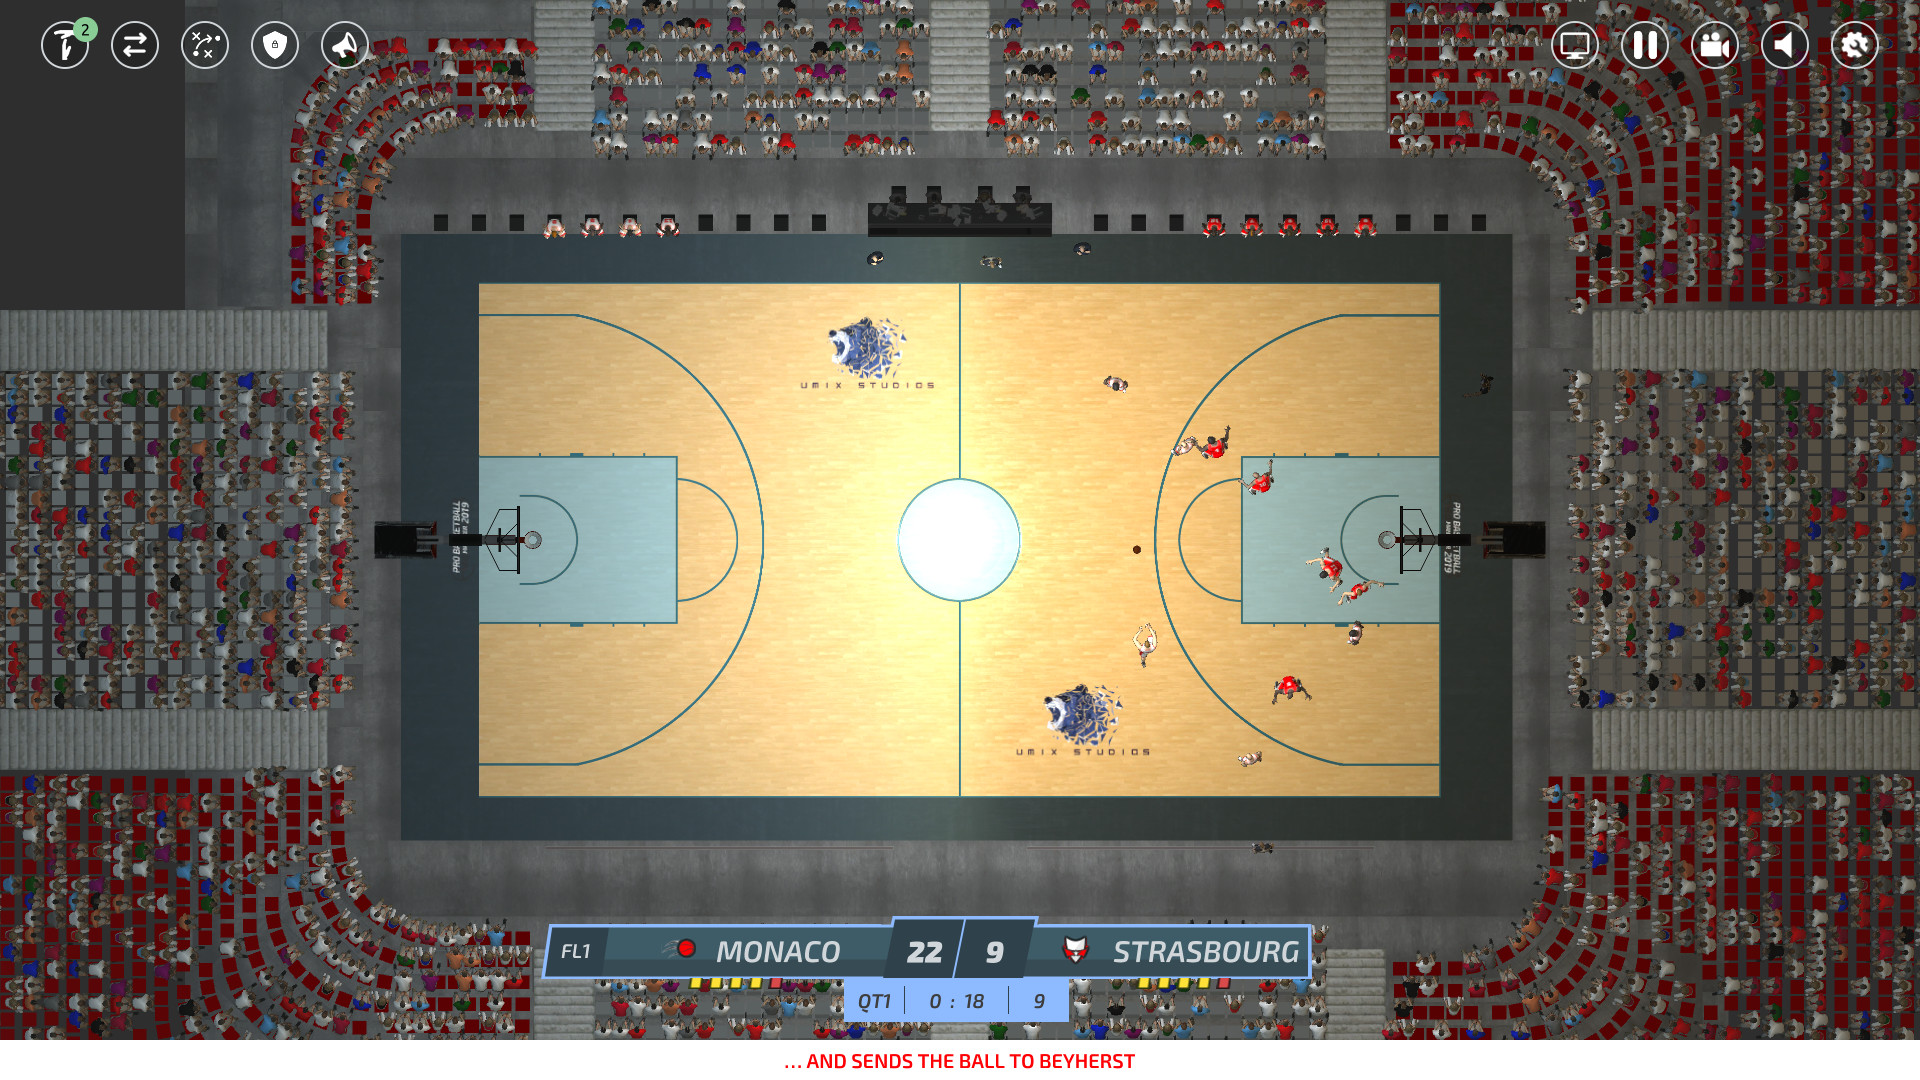 pro basketball manager 2022 review